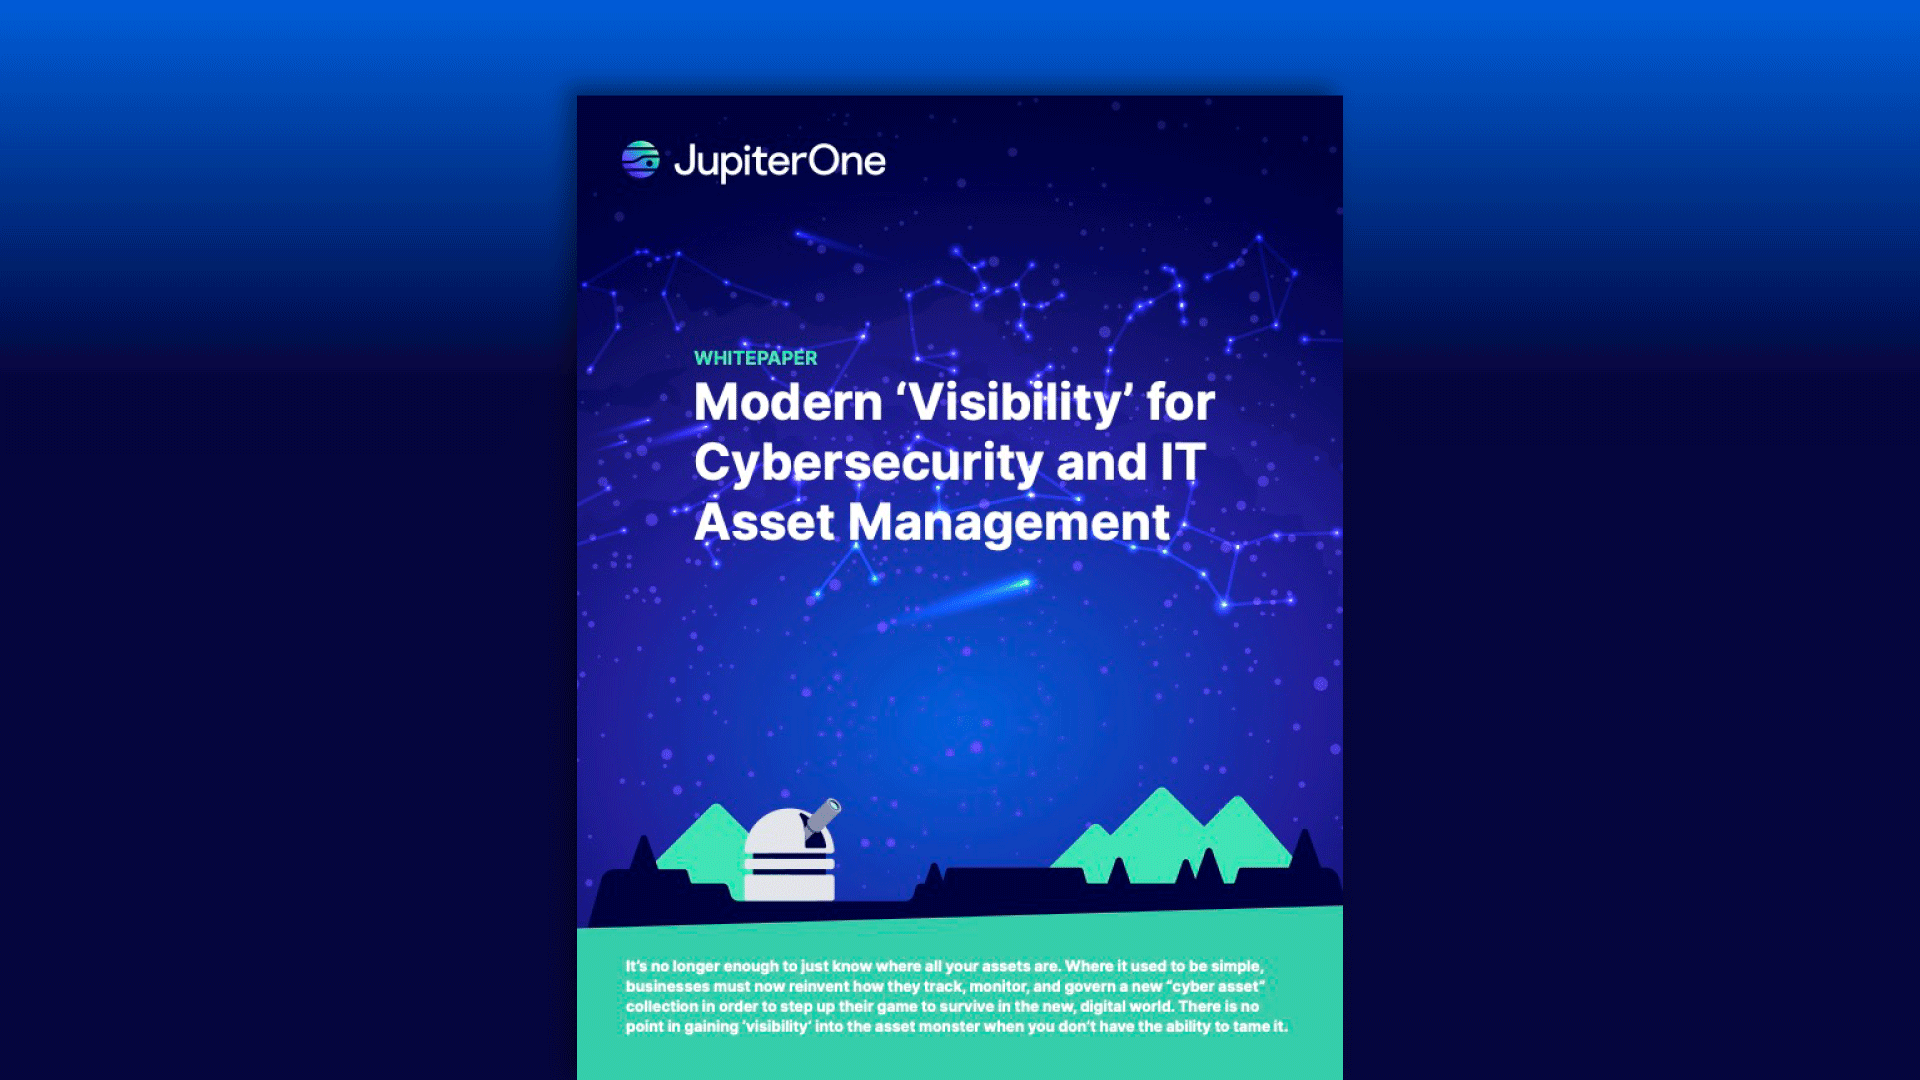 ebook-modern-visibility_resource-image